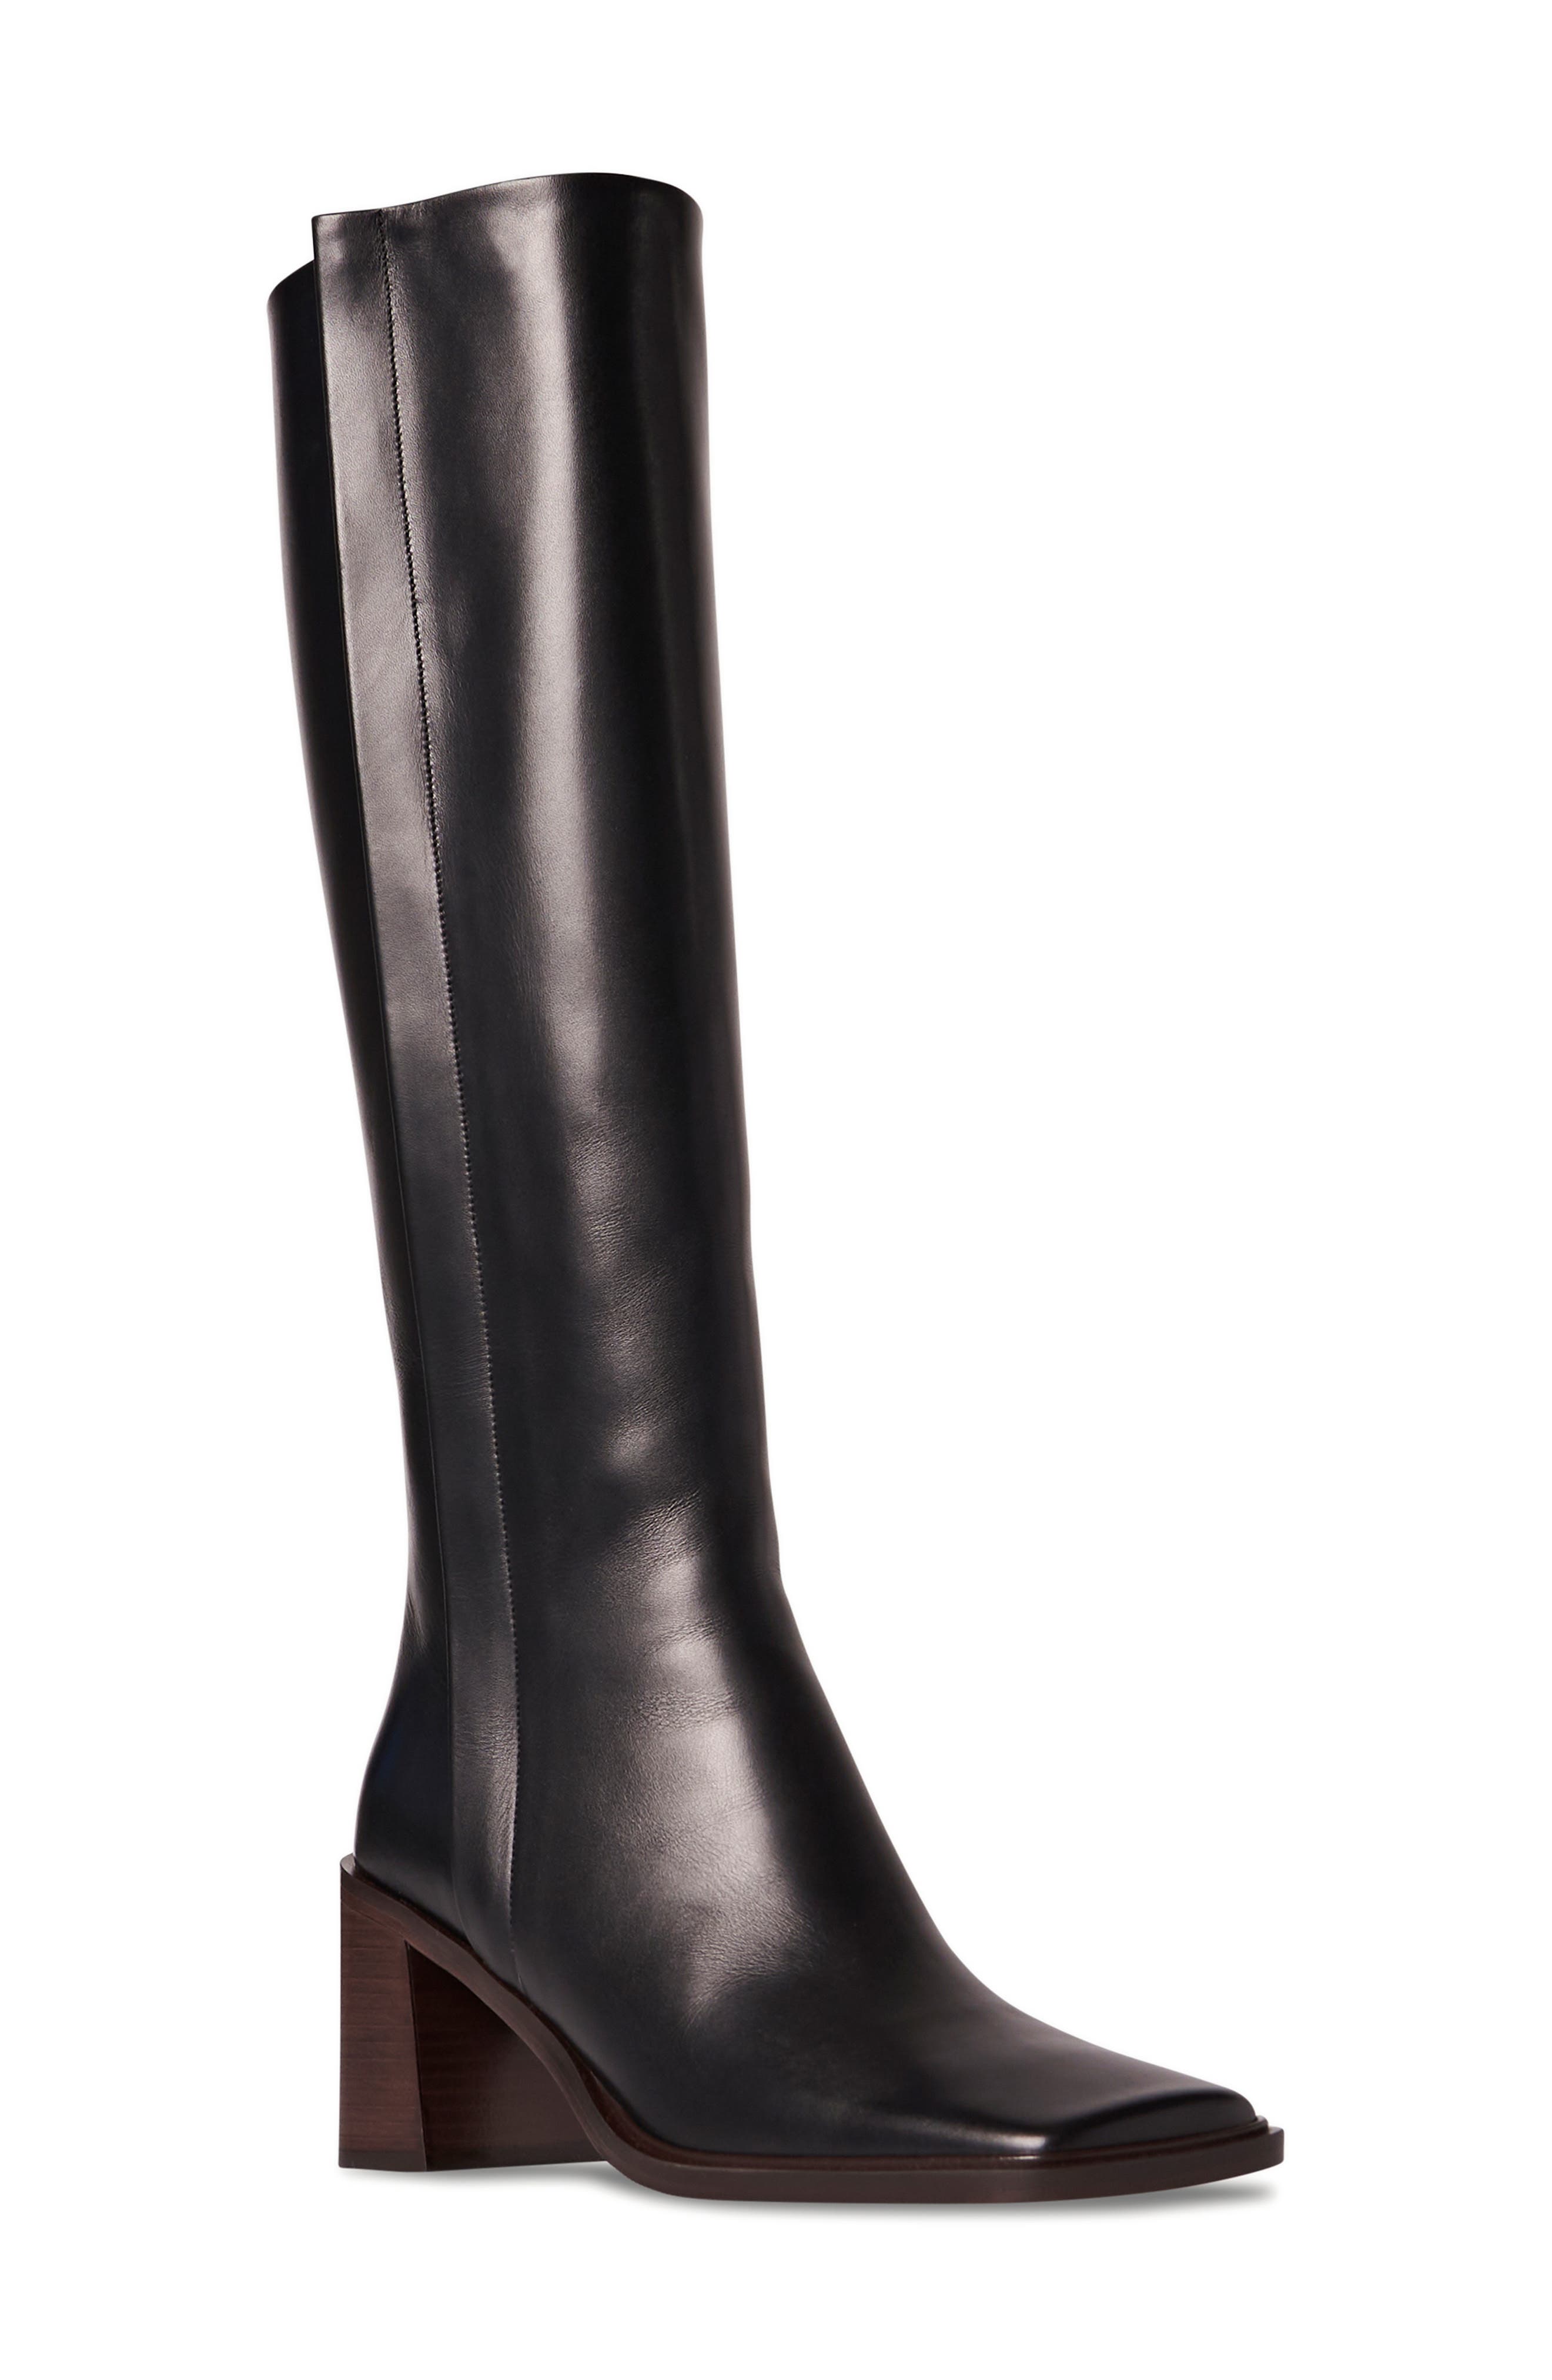 The Row Patch Square Toe Boot in Black at Nordstrom, Size 5Us